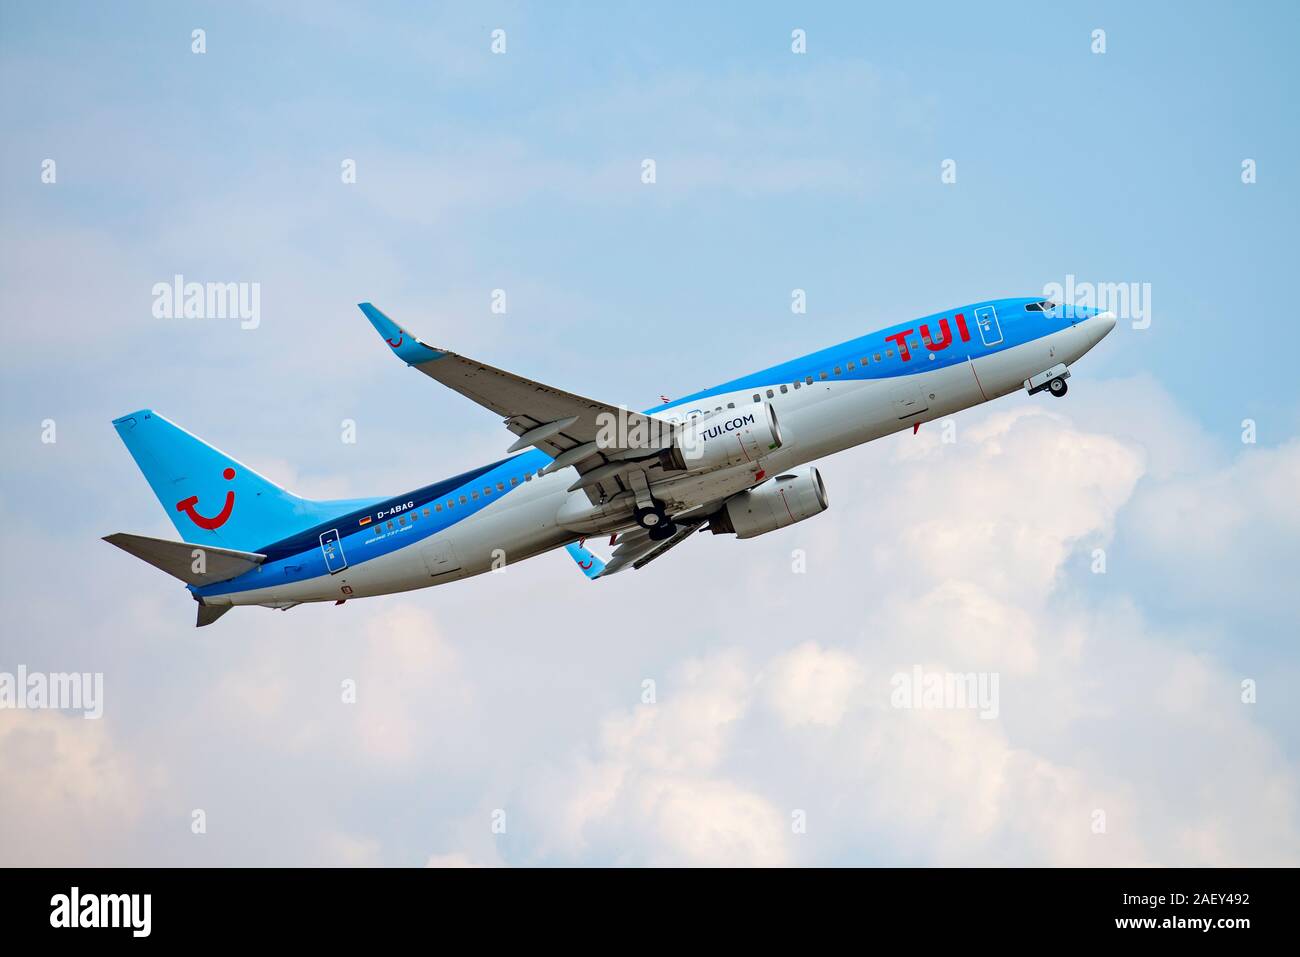 Frankfurt, Hesse/Germany - 23.07.2019TUIfly aircraft (Boeing 737-800 - D-ABAG) taking off from Frankfurt Airport Stock Photo